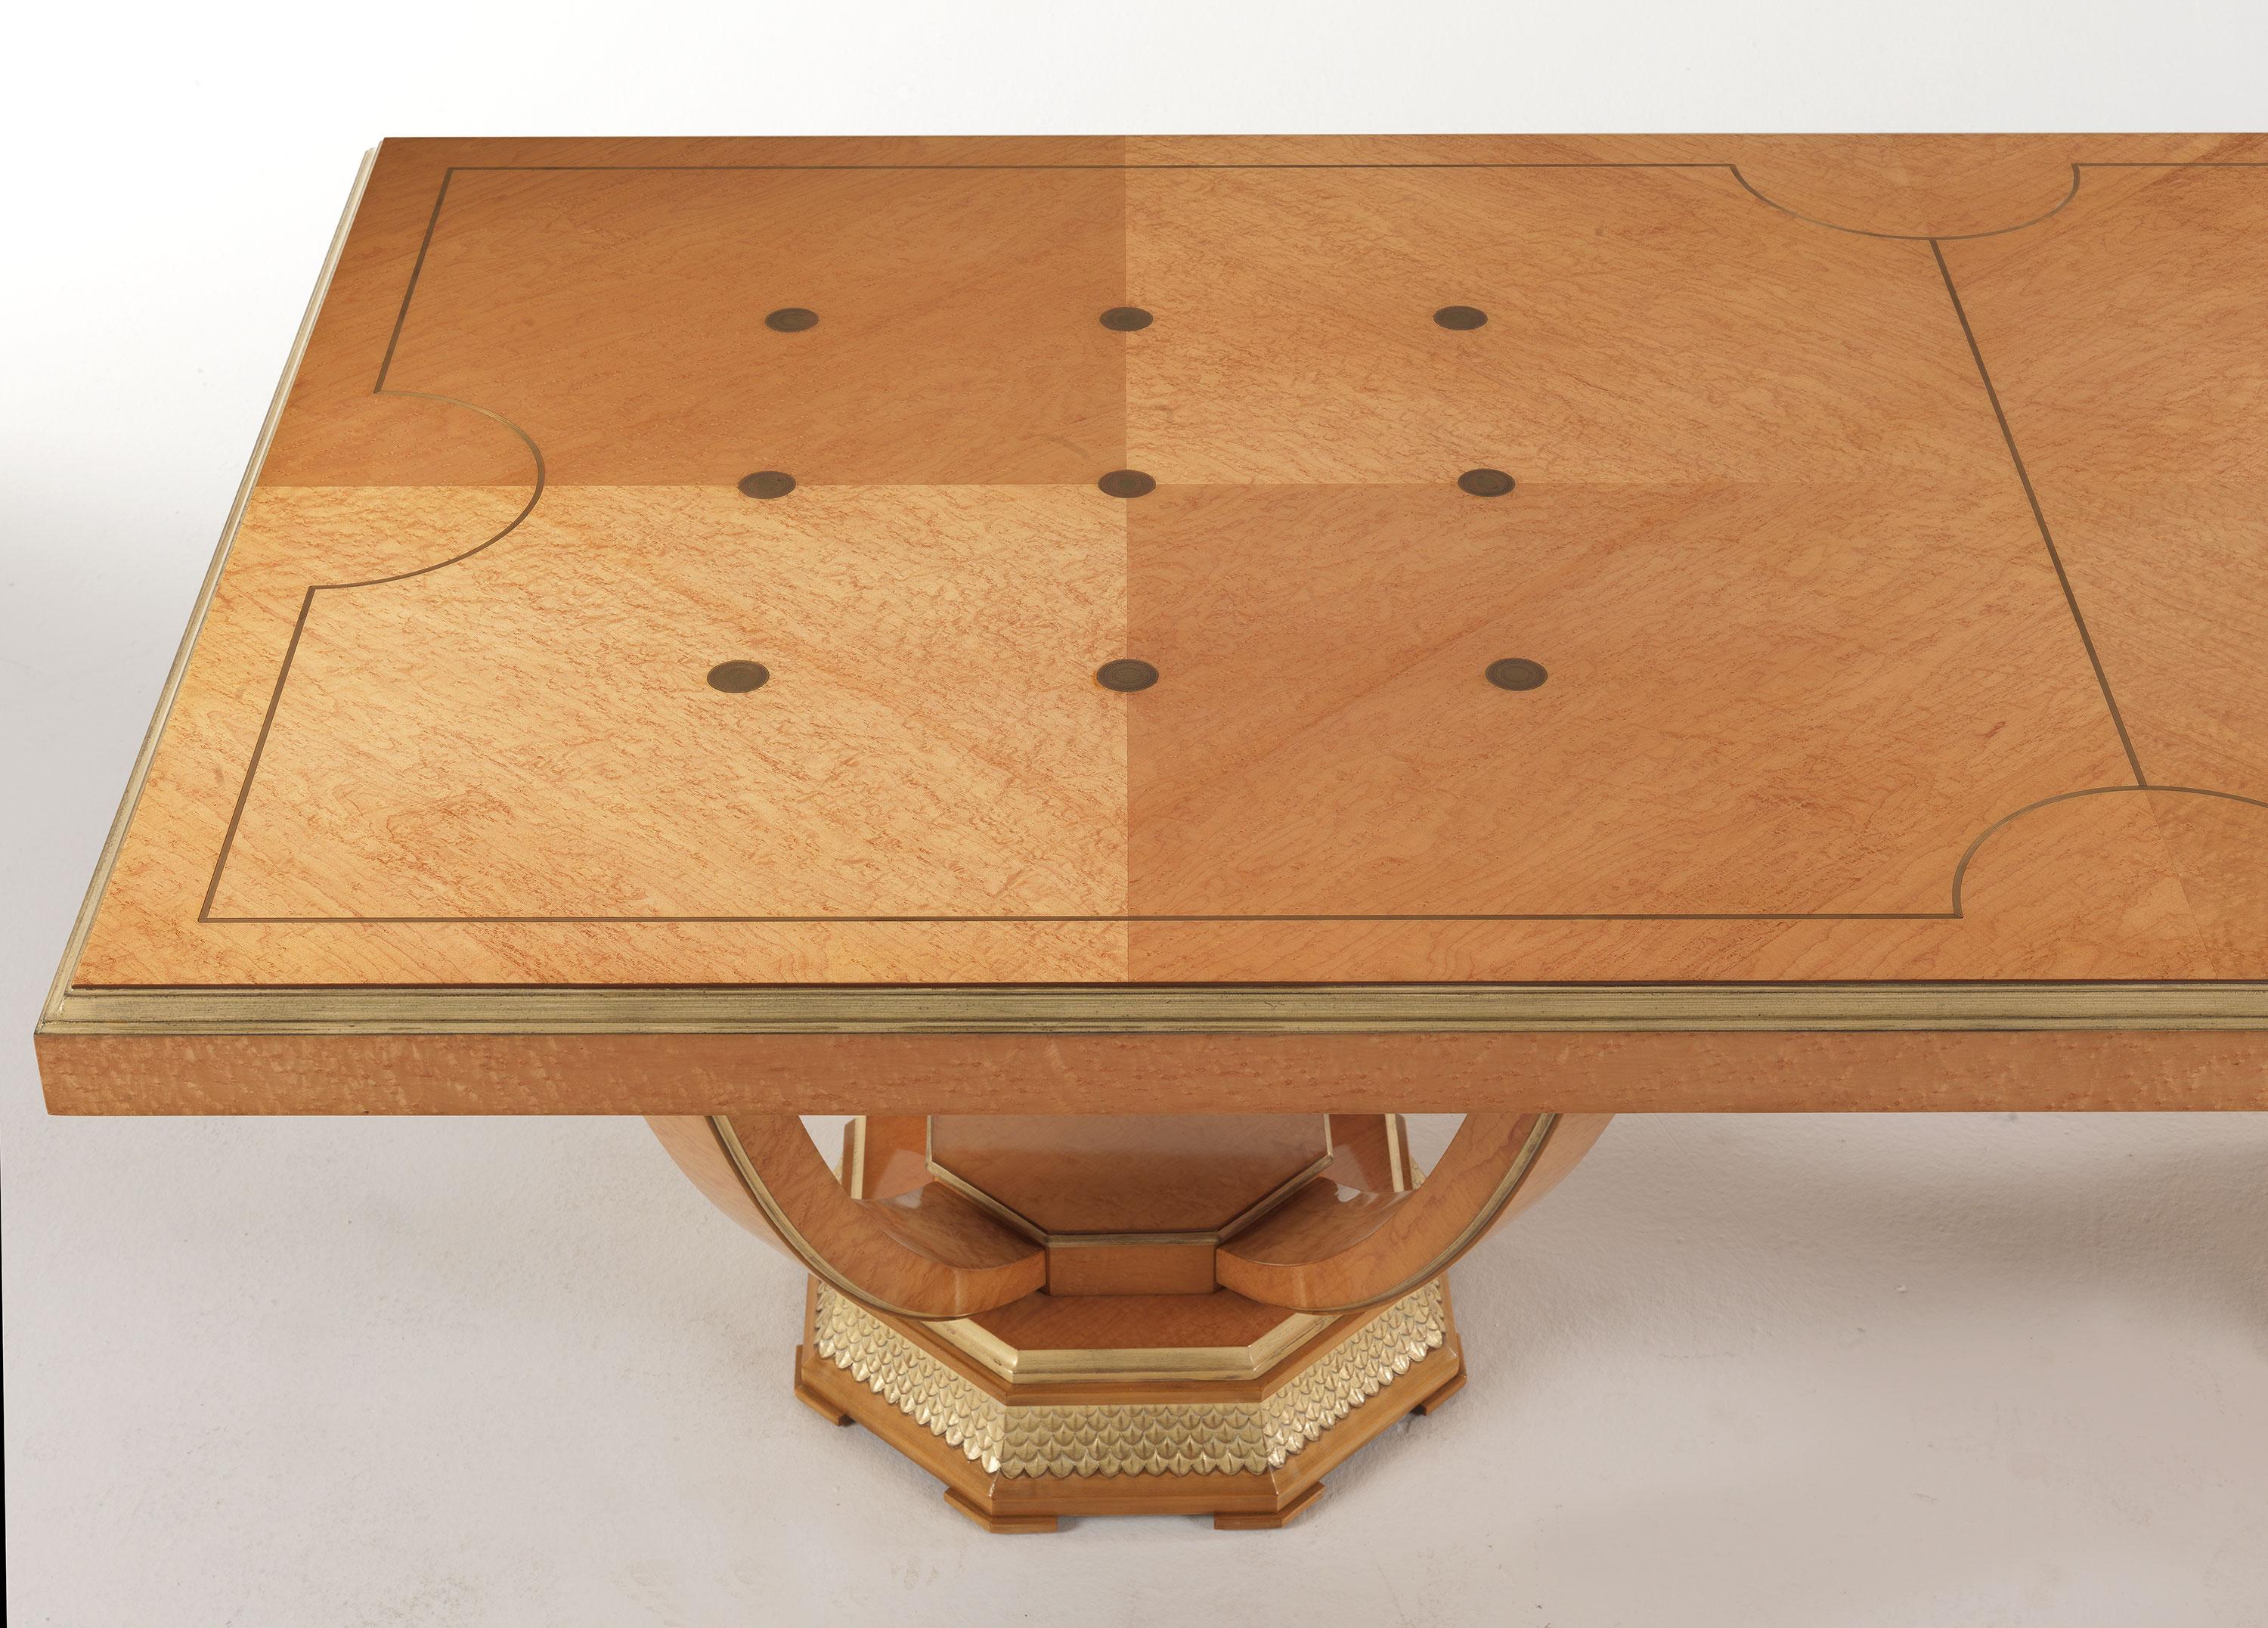 Pleasure is a line of furnishings characterized by an elegant and refined charm. The dining table of the collection, with an art deco design, features a sculptural base, while the top is embellished by brass inlays. The details in patinated antiqued